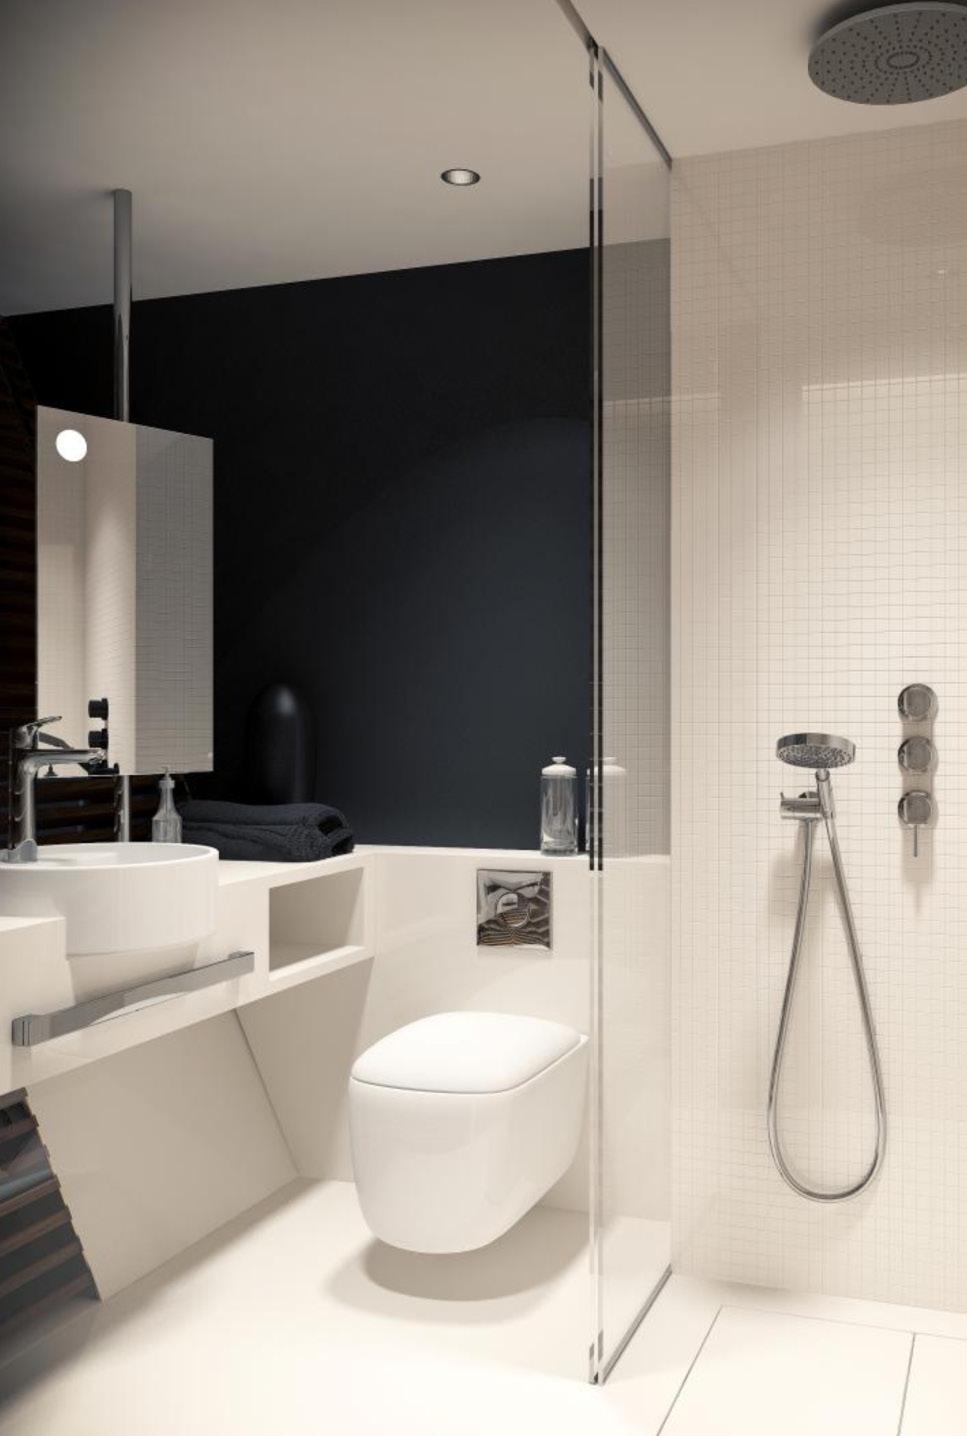 PREFABRICATED BATHROOM - BENEFITS The following issues constitute the main factors that argue in favour of choosing prefabricated bathrooms: 1 Whole bathroom (walls, floors, tiles, fittings,